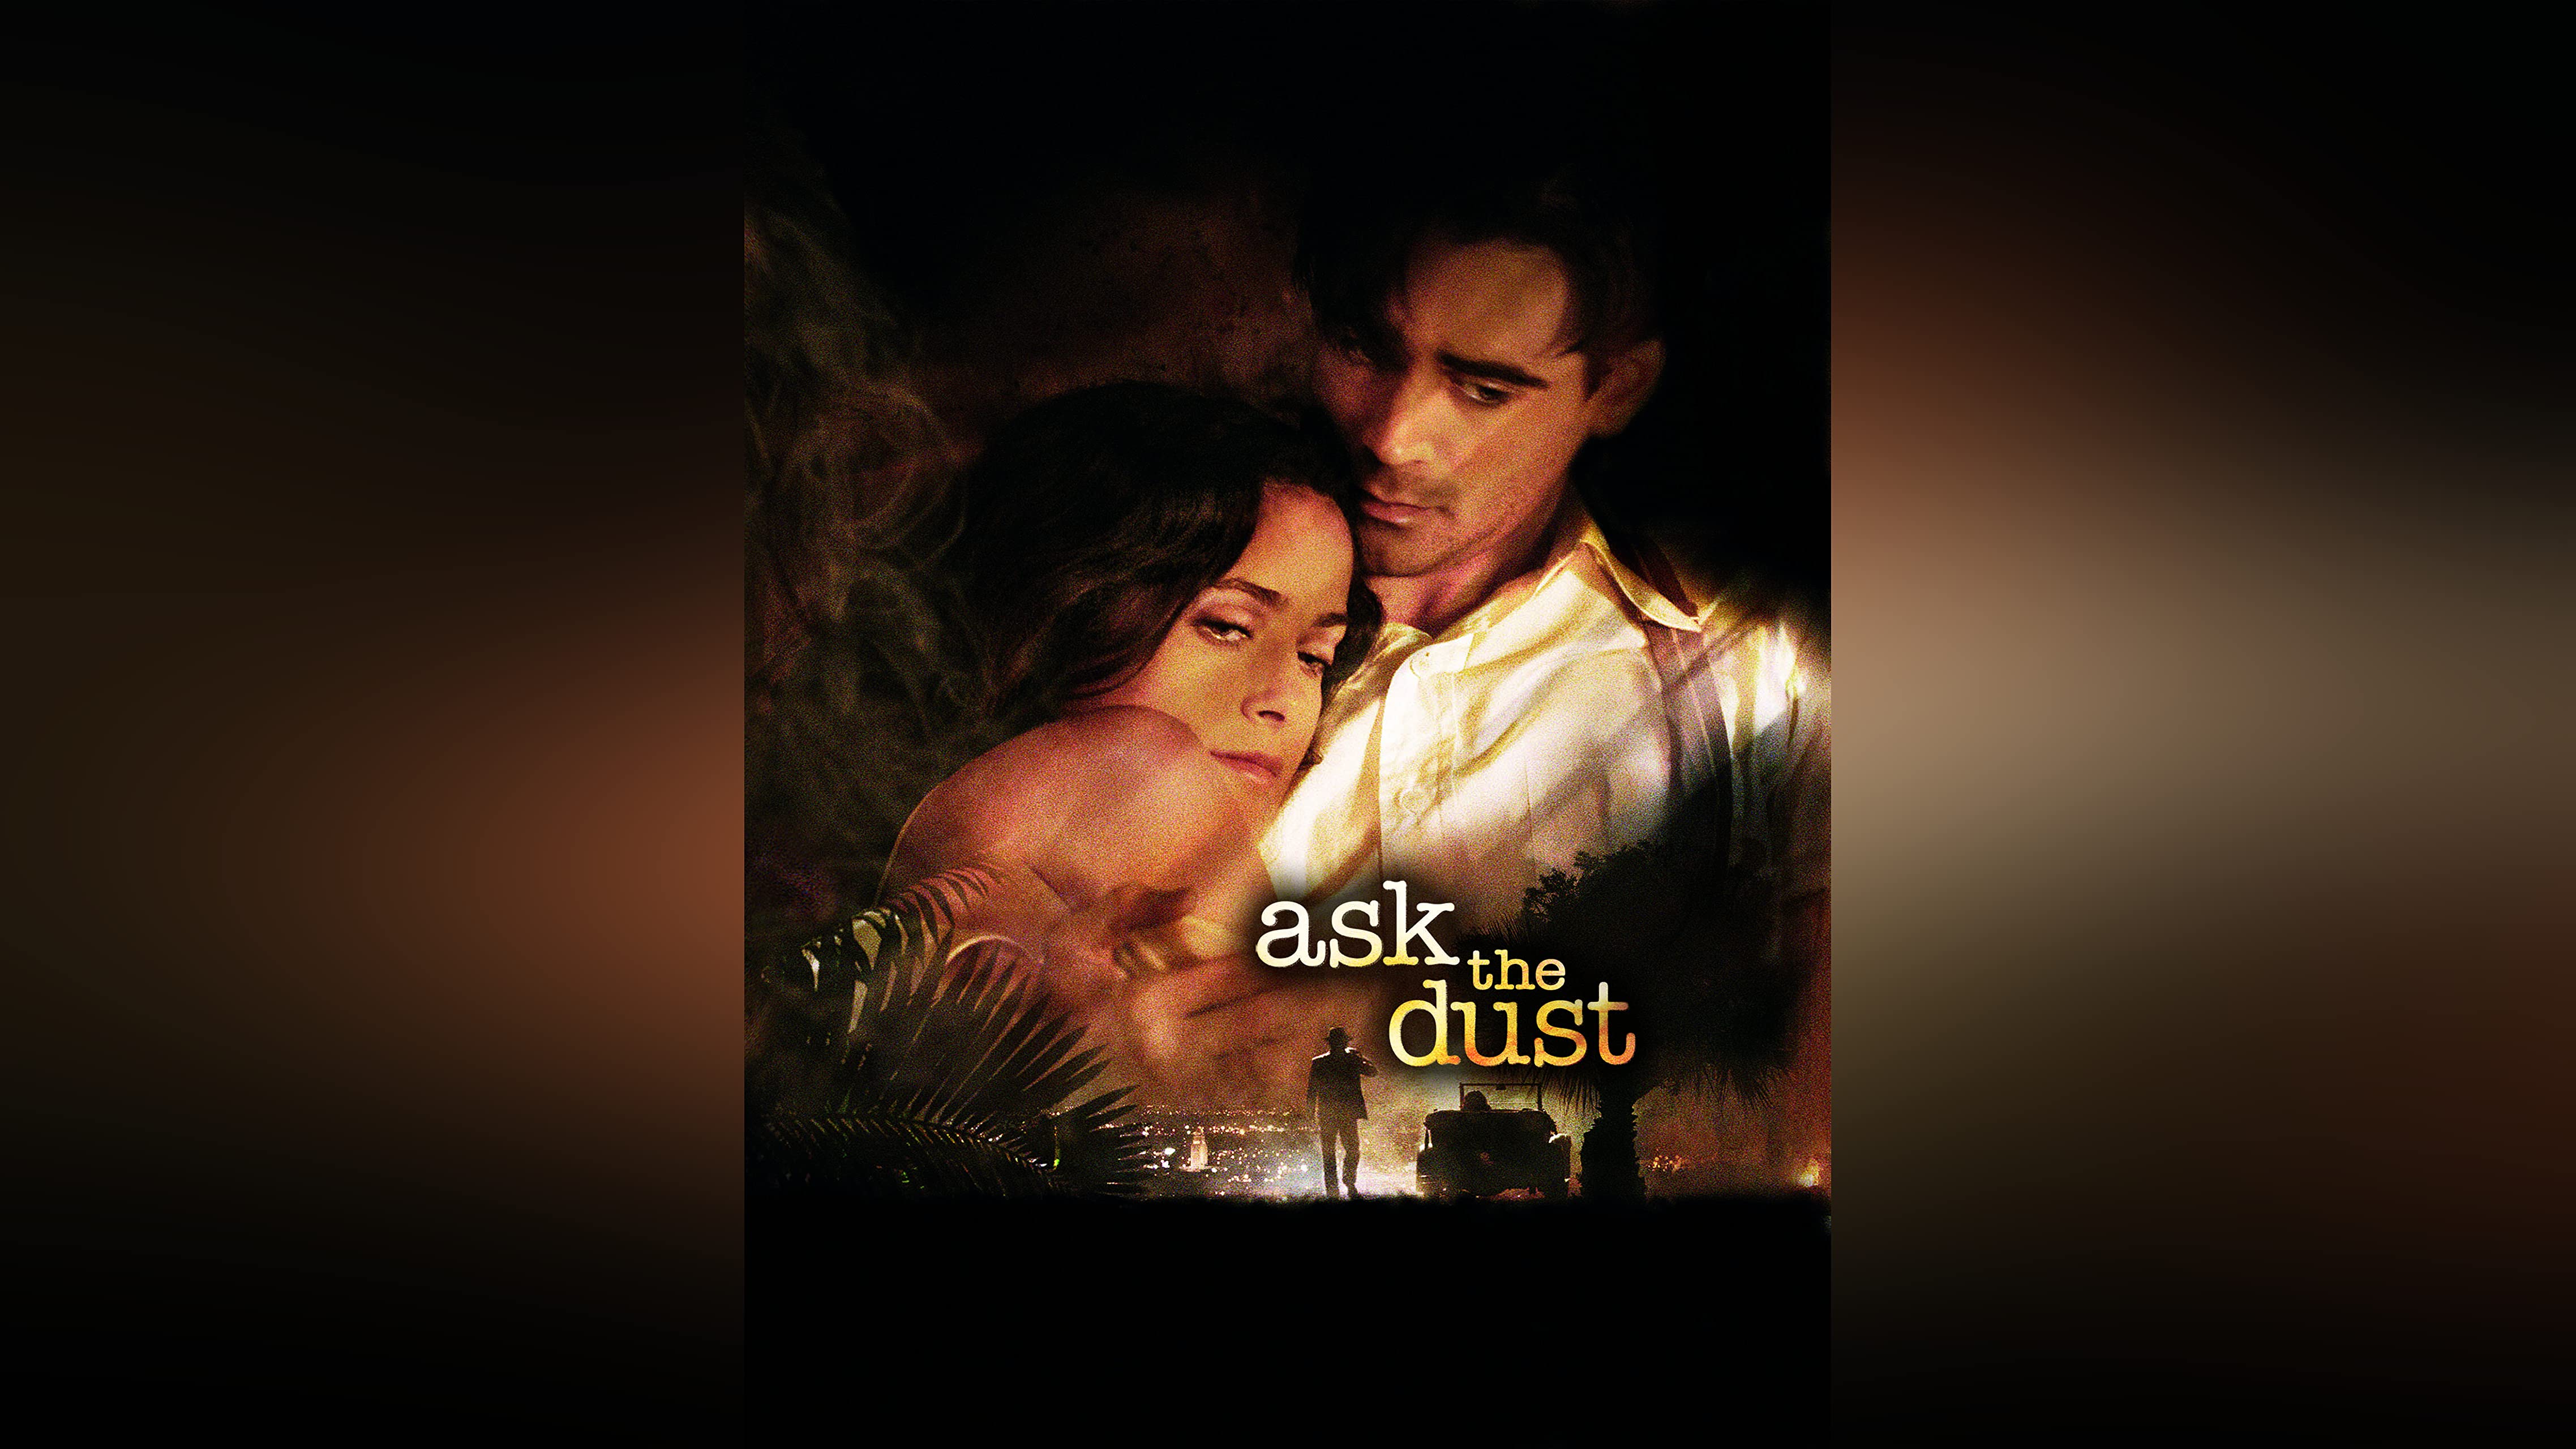 adam eisler recommends Ask The Dust Full Movie